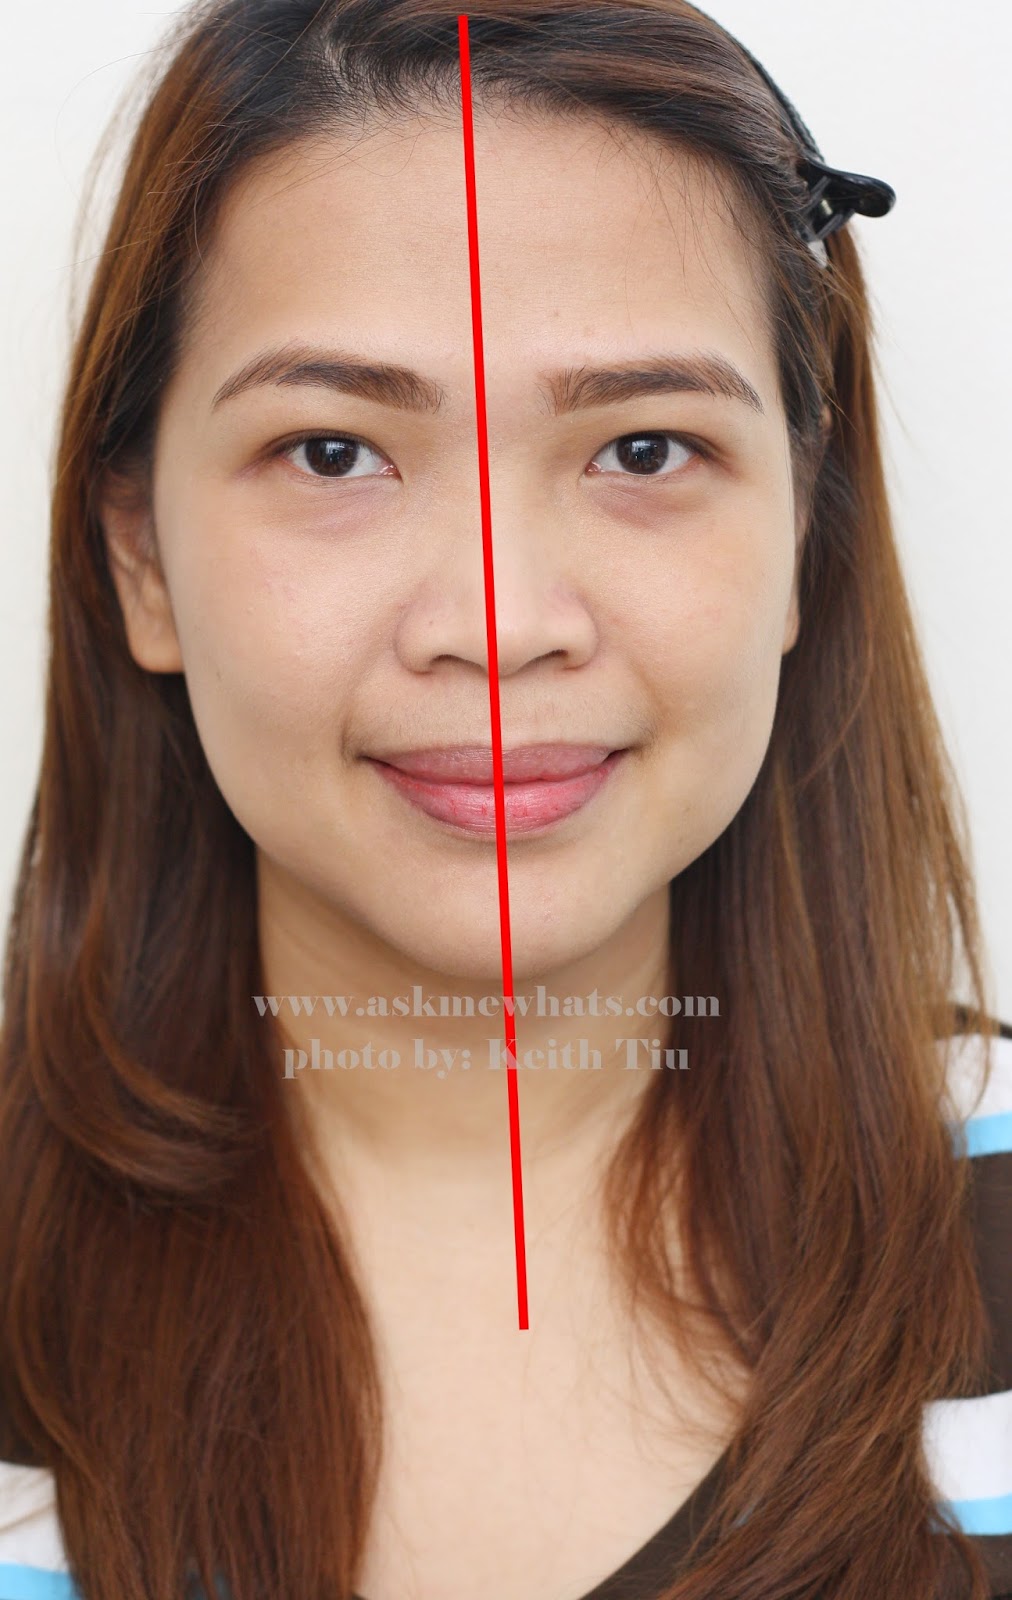 before and after using L'Oreal Paris Lucent Magique BB Skin Luminizing BB Cream SPF19 